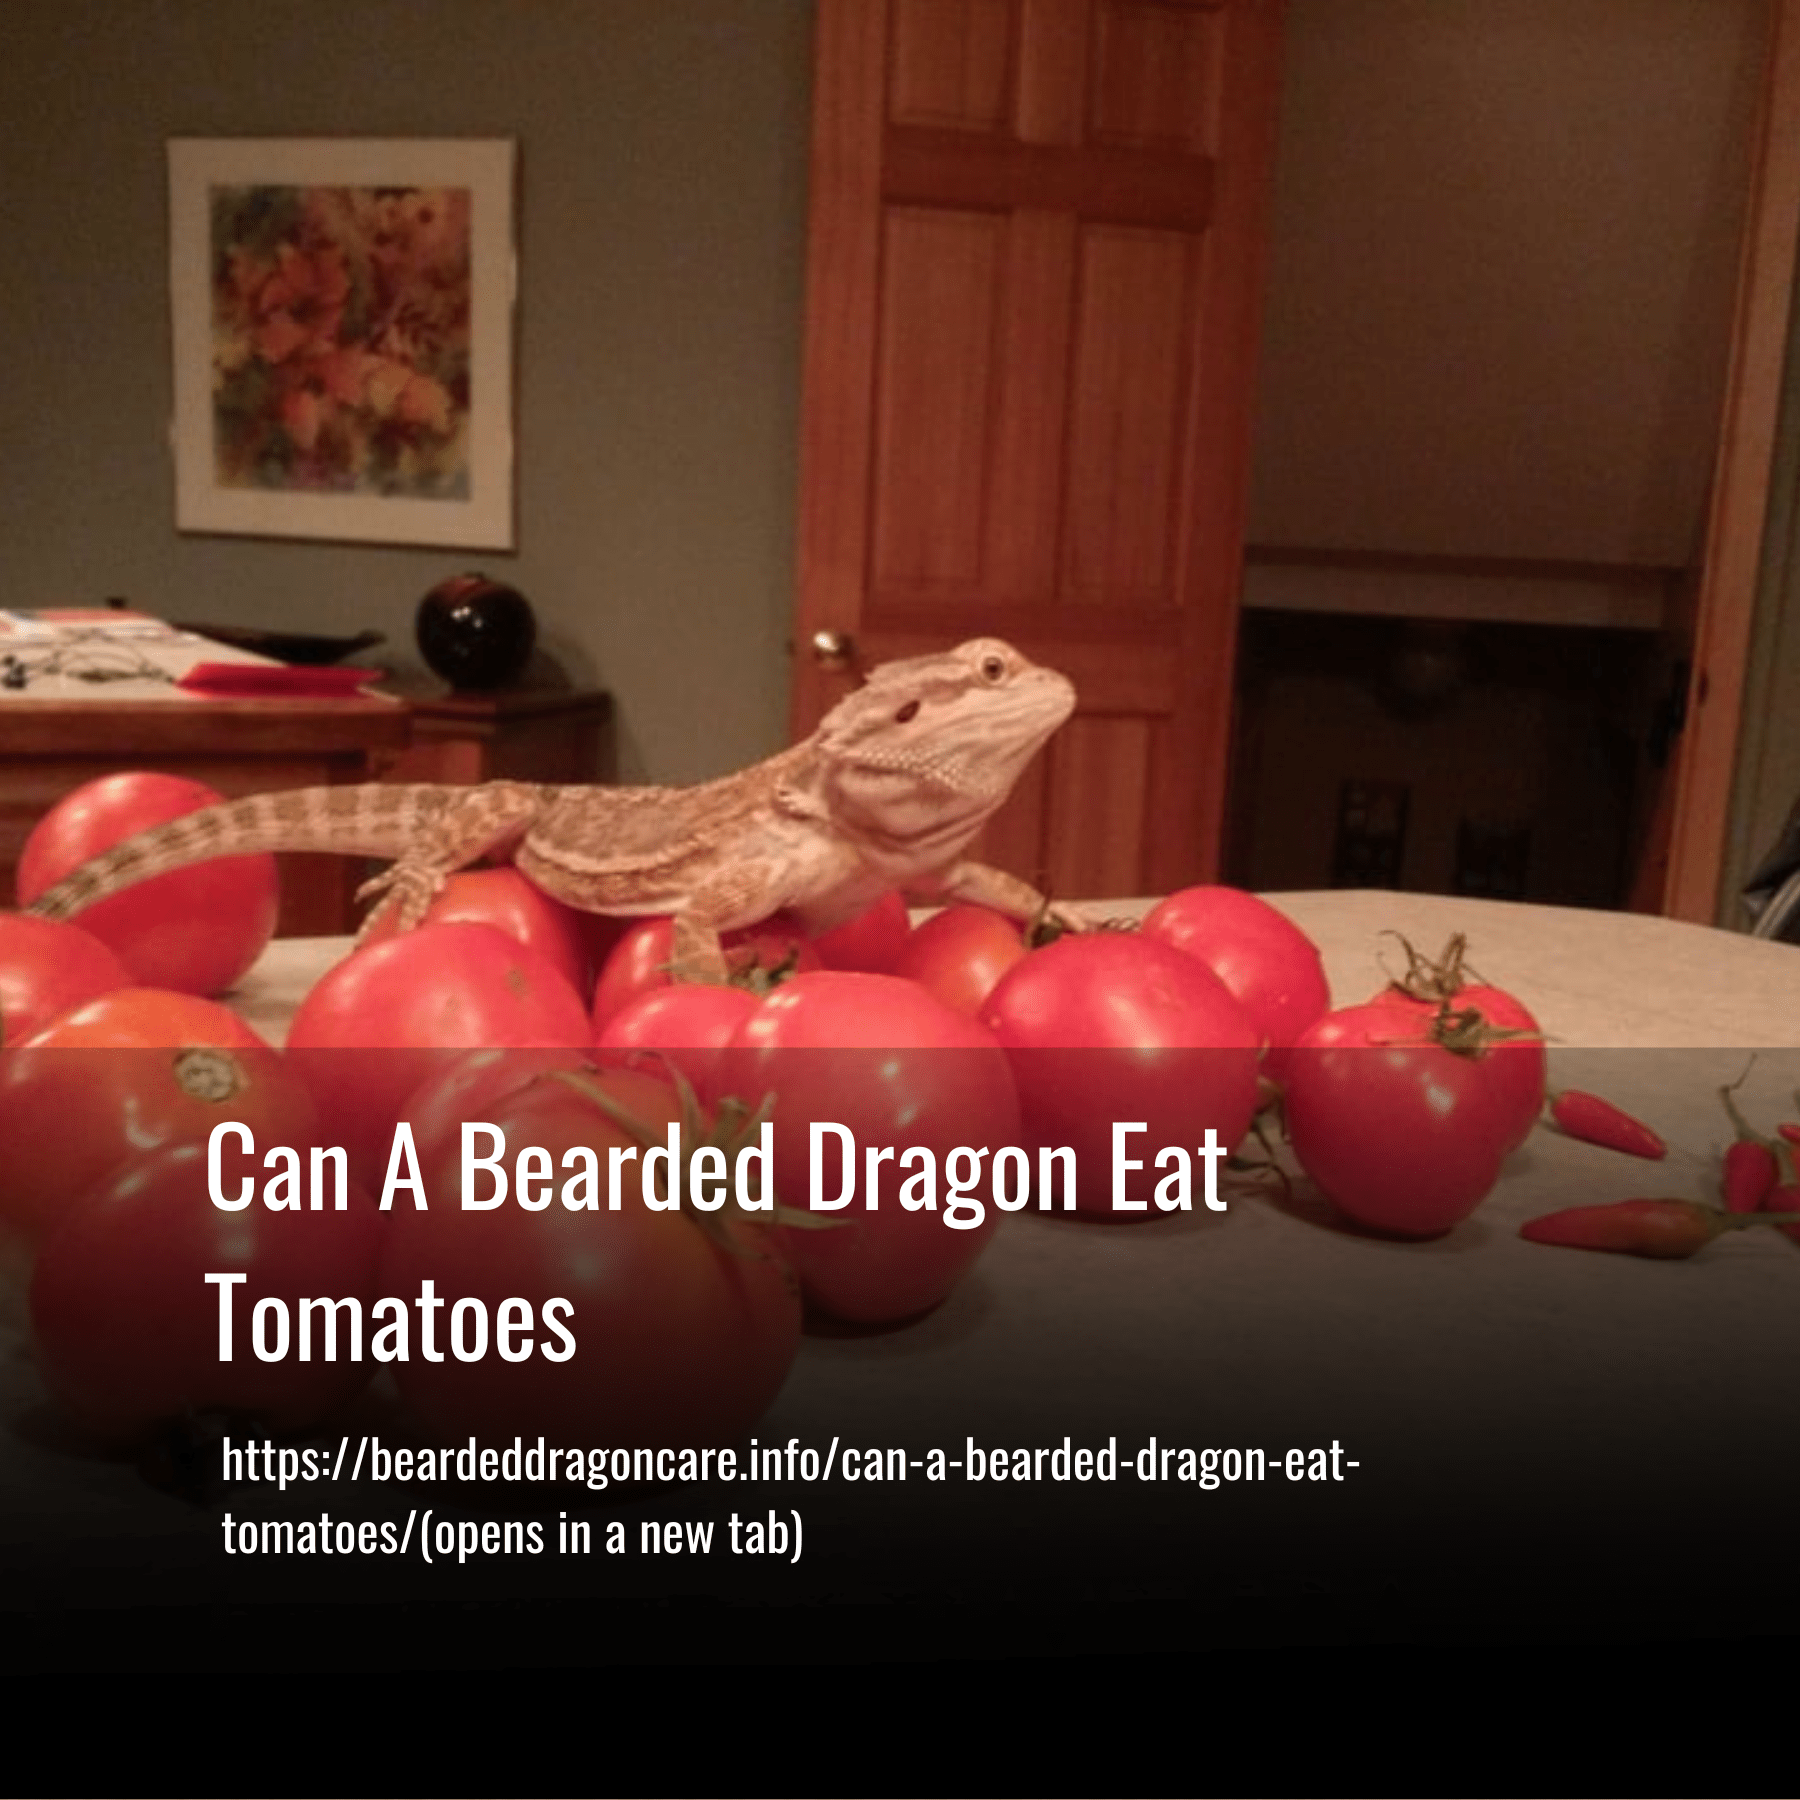 Can A Bearded Dragon Eat Tomatoes